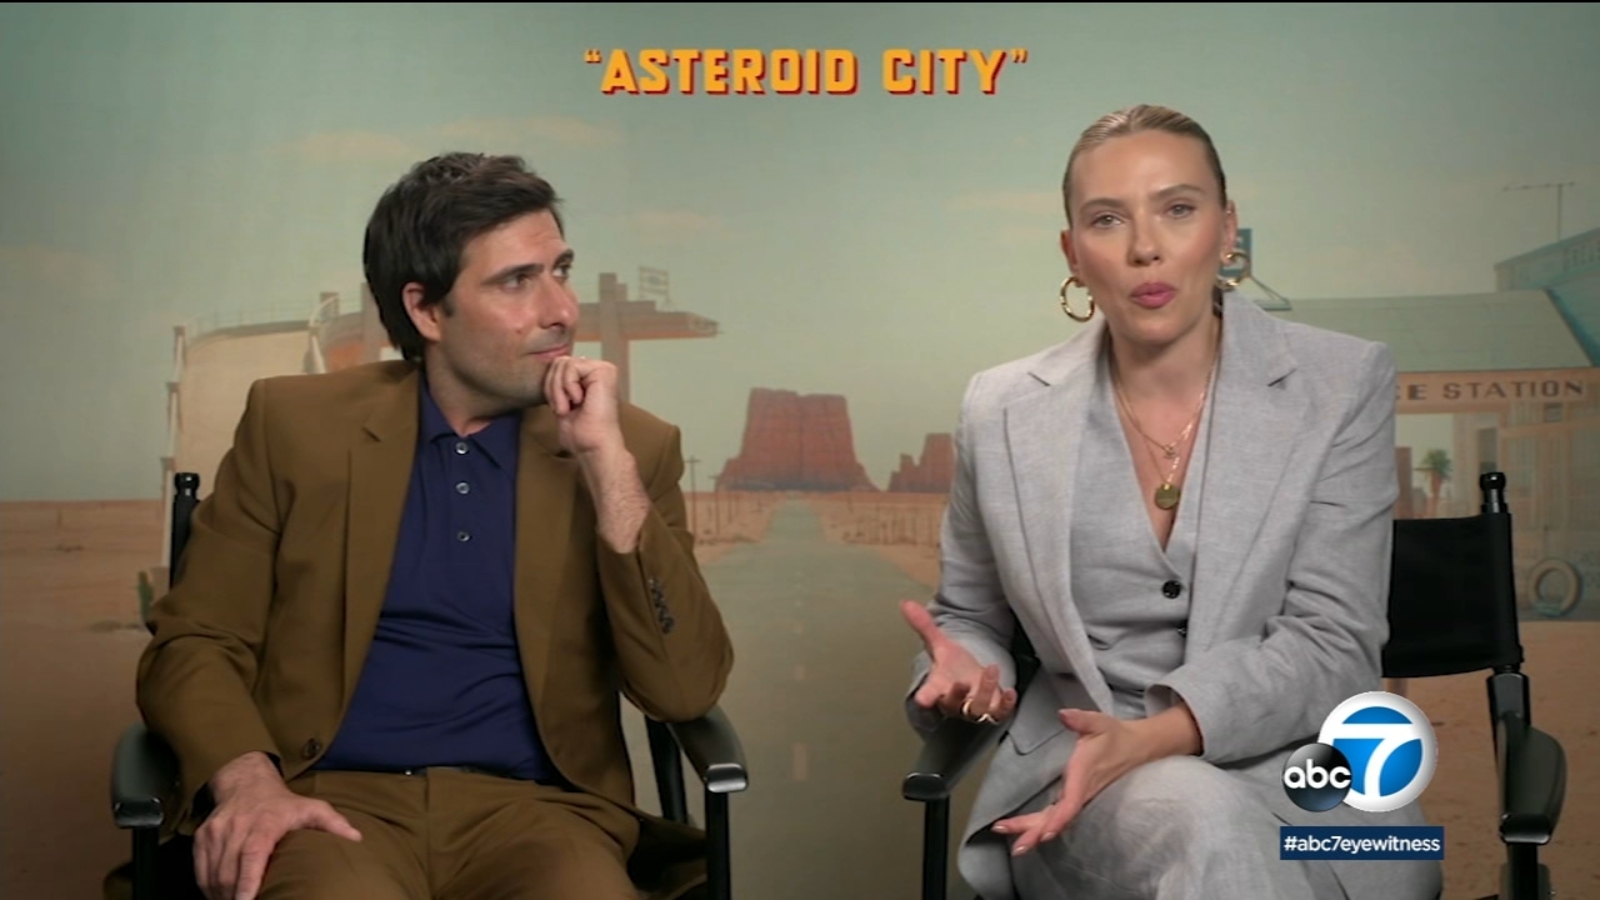 Actors Discuss Asteroid City Project: Behind the Scenes Secrets and Standout Performances Unveiled. 8